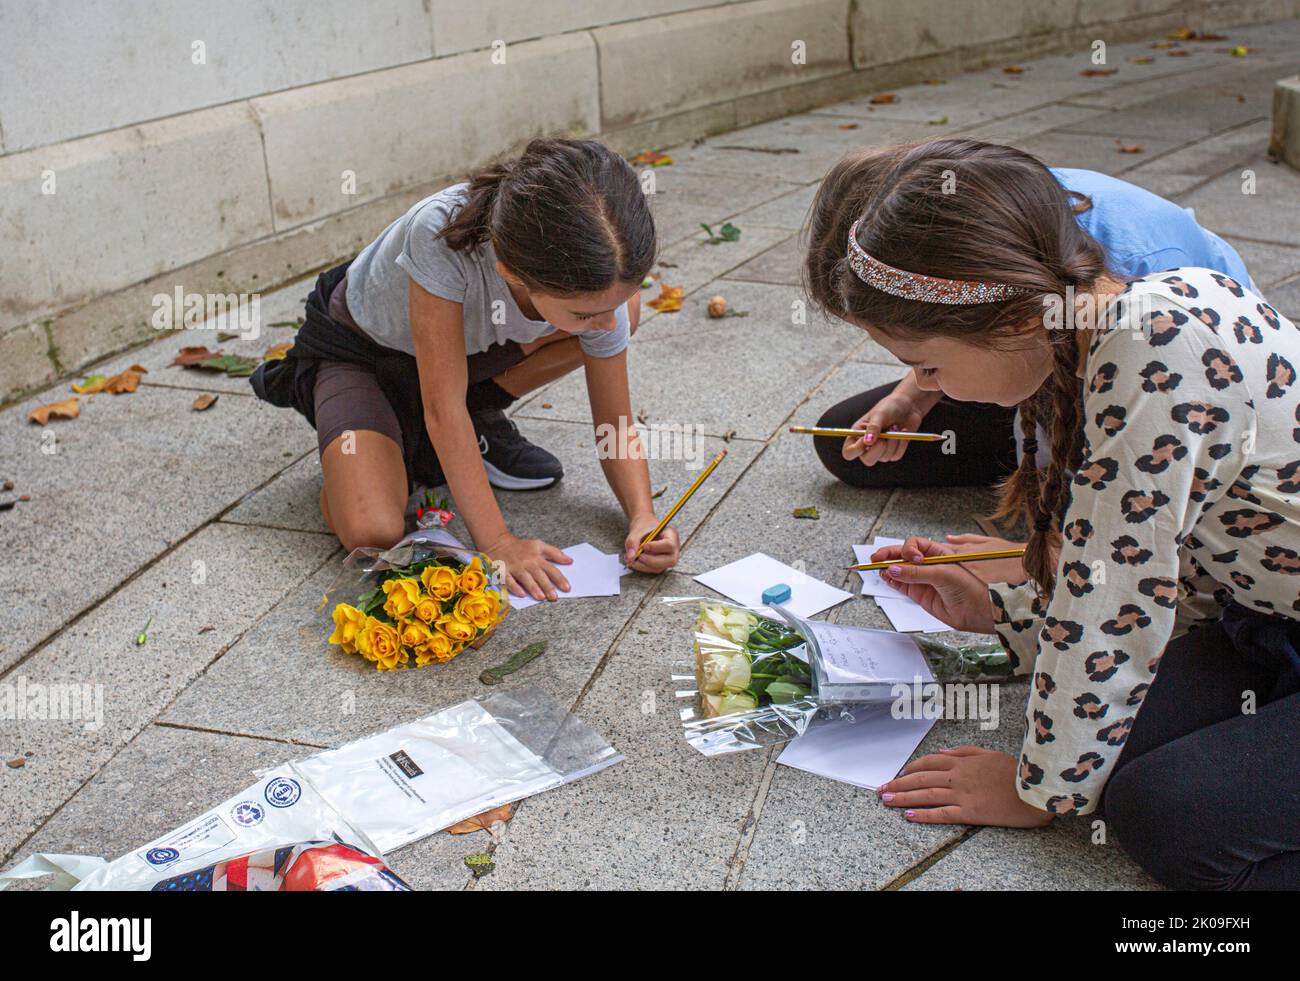 London UK 10th September 2022 - Young girls, writing messages and brining flowers - Mourners gather at Buckingham Palace placing flowers and paying their respects - Queen Elizabeth the second died yesterday in her Platinum Jubillee year at Balmoral Castle. Photo Horst A. Friedrichs Alamy Live News Stock Photo